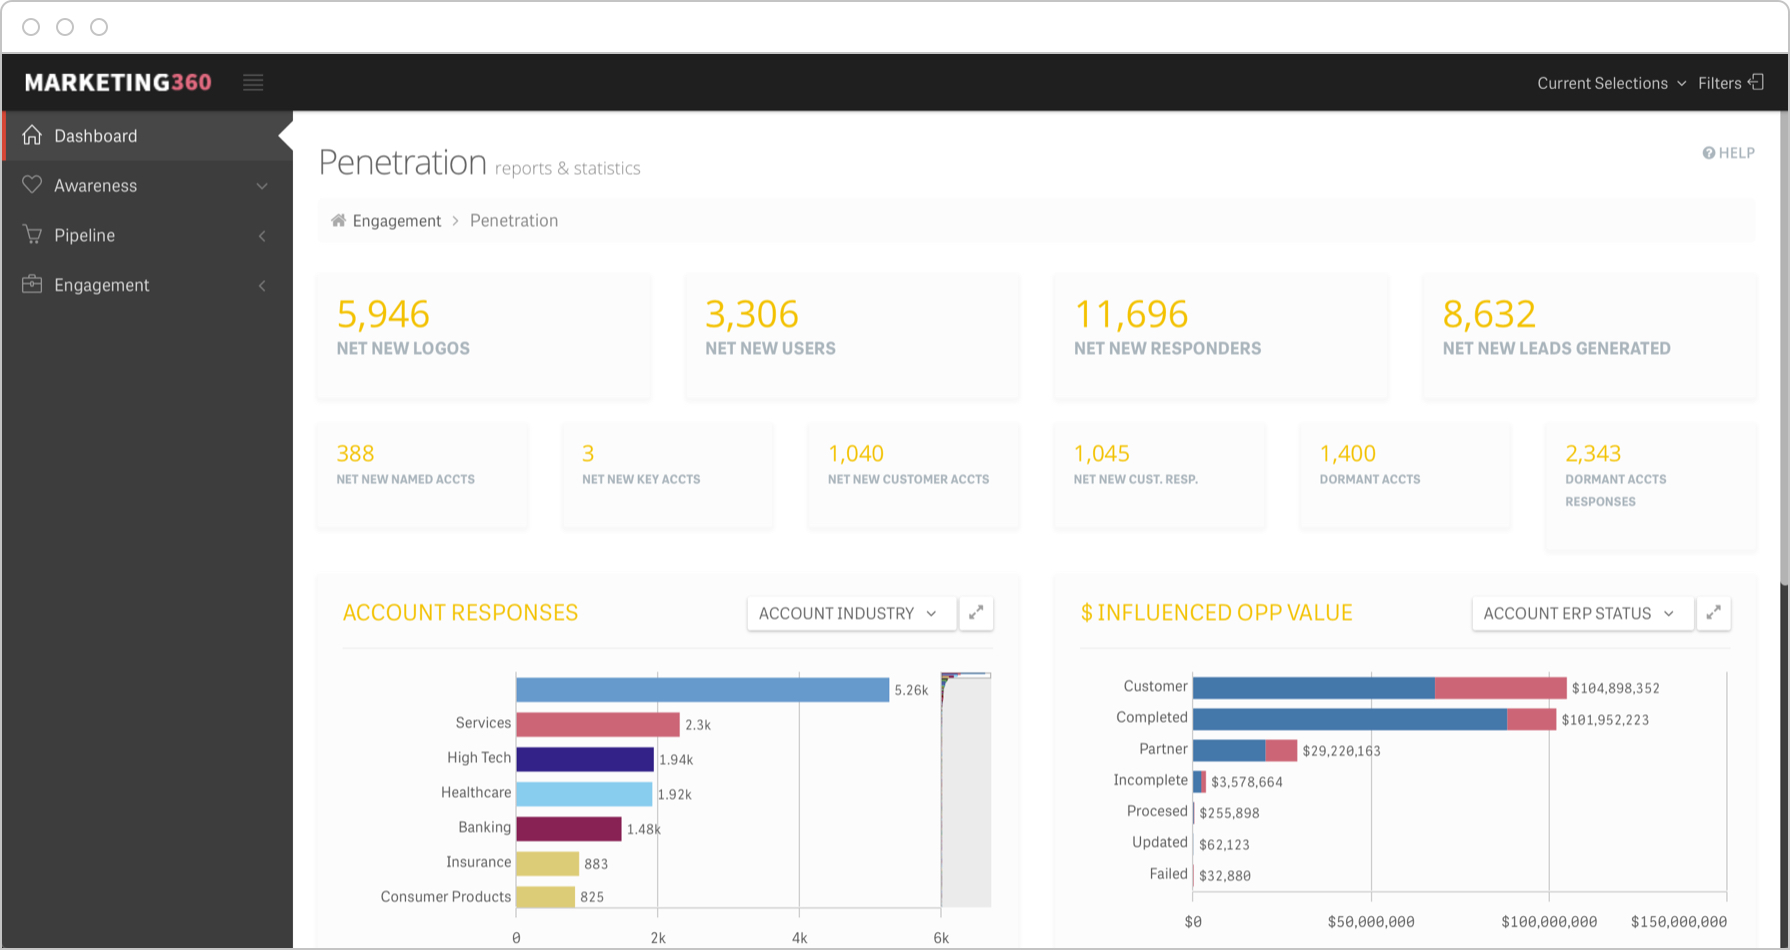 ABM dashboards allow drilling into data to analyze response, conversion and revenue on an account basis.